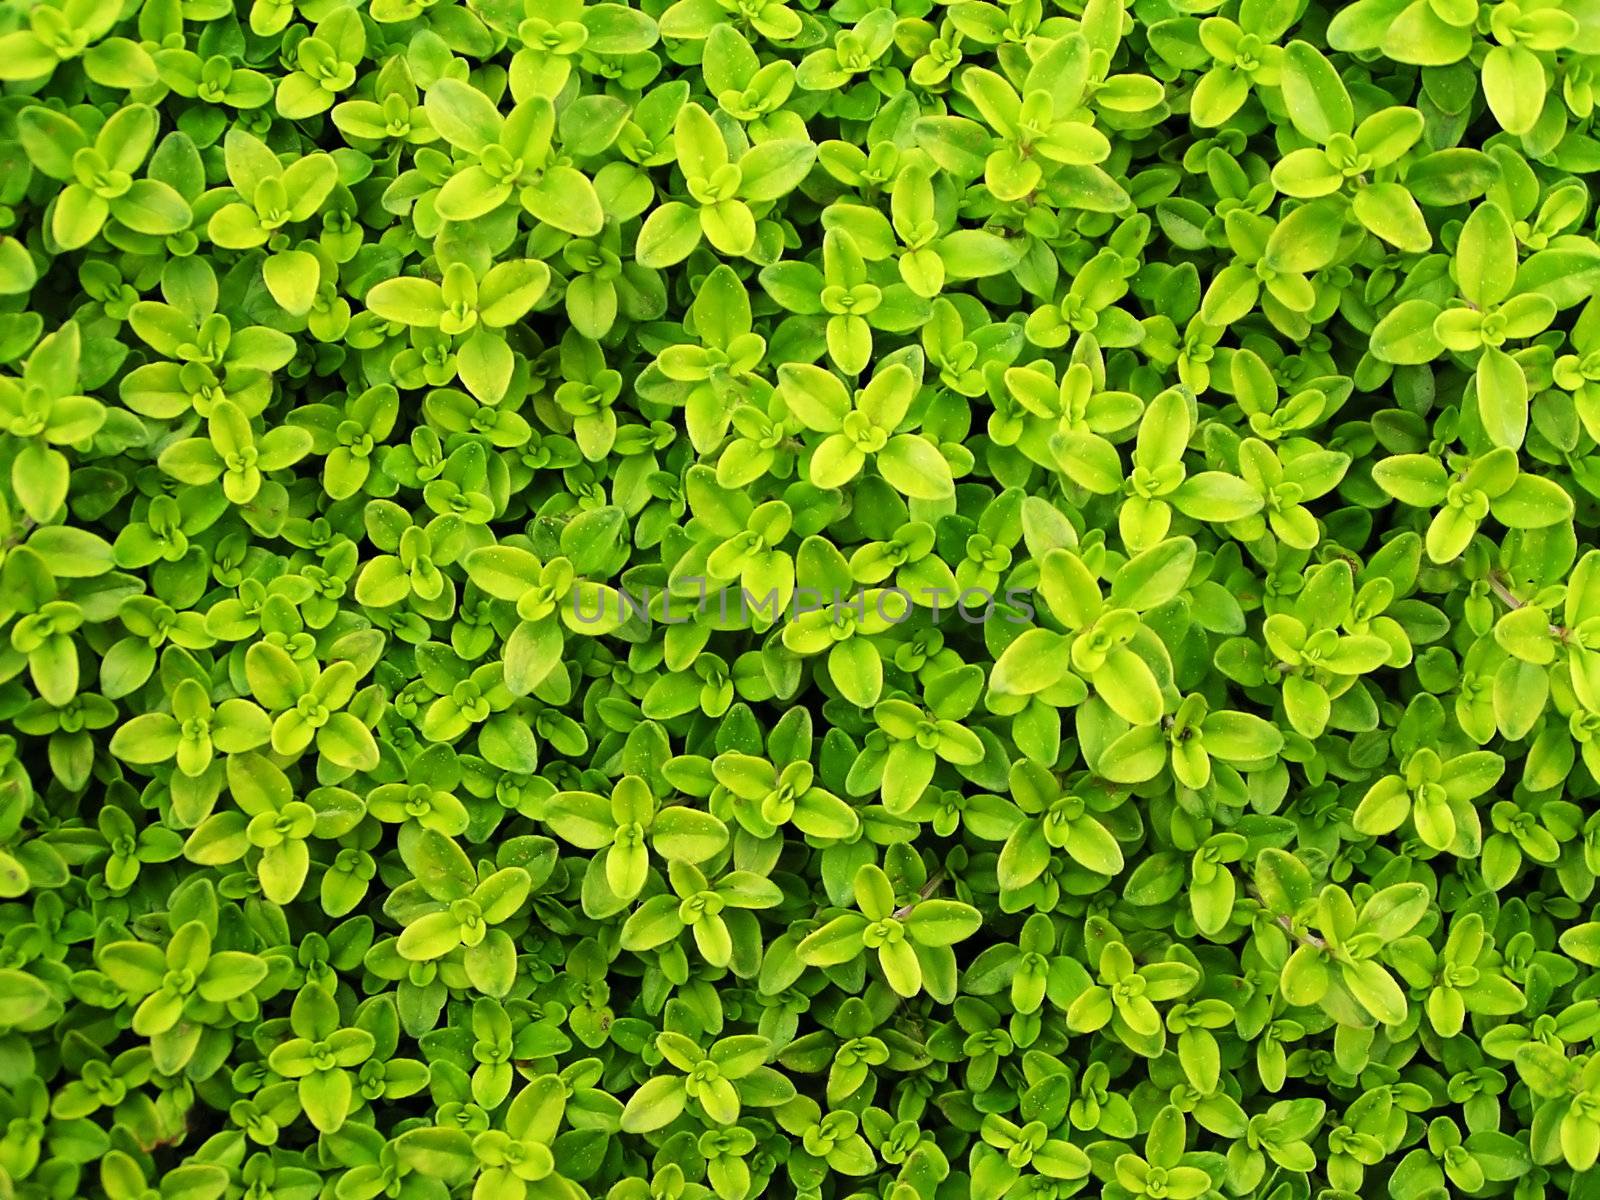 Small and fresh green leafs background

